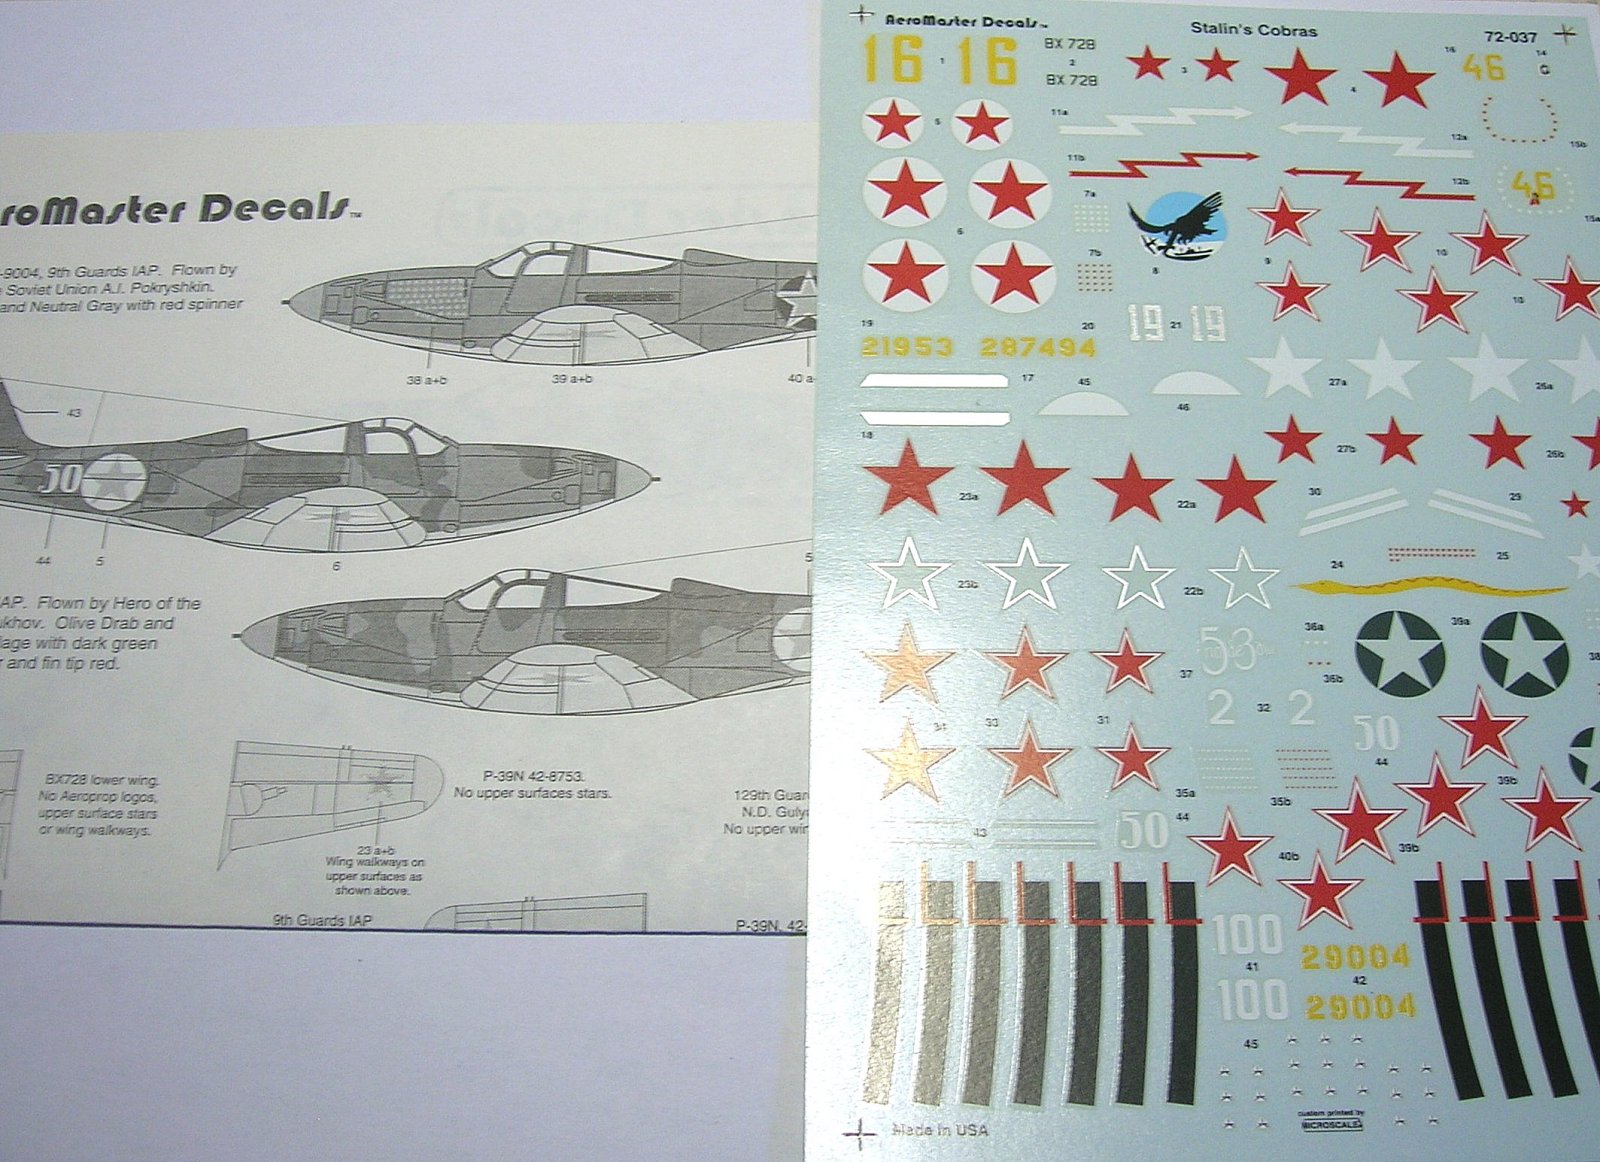 [Arma Hobby] 1/72 - Bell P-39N Airacobra  - Page 3 _decal14